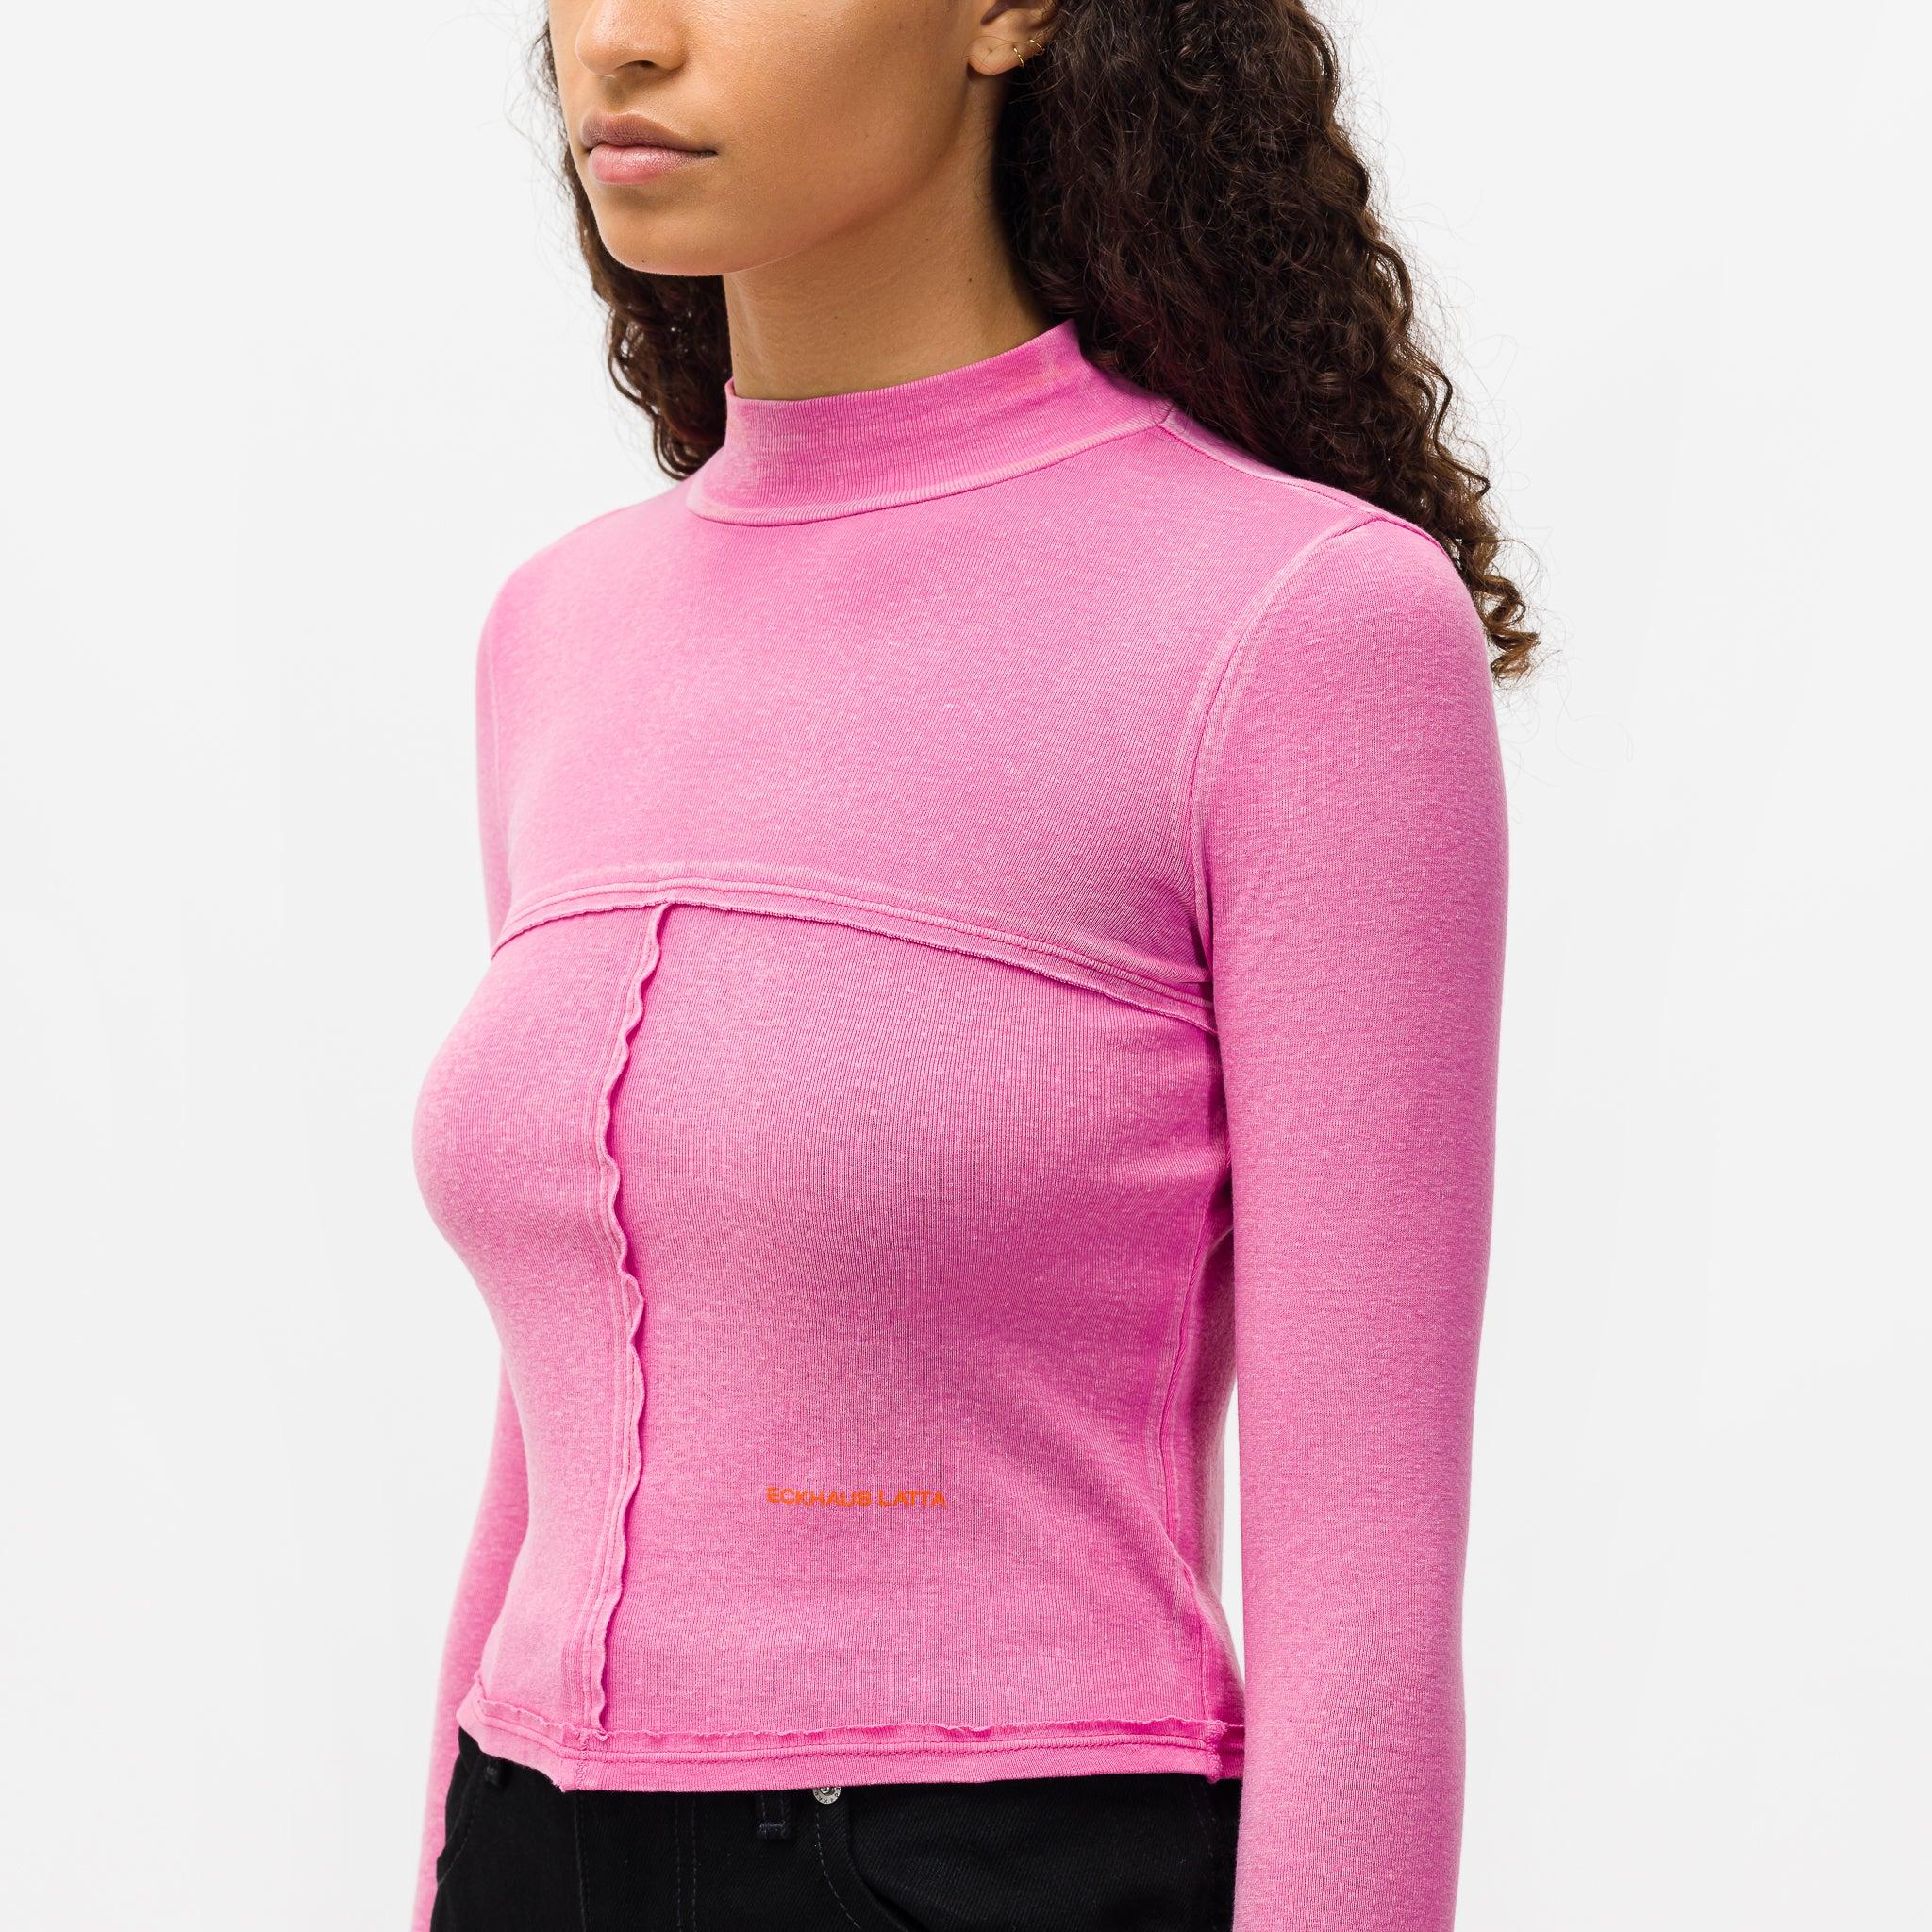 Atterley Clothing Tops High Necks Lapped Baby Turtleneck 